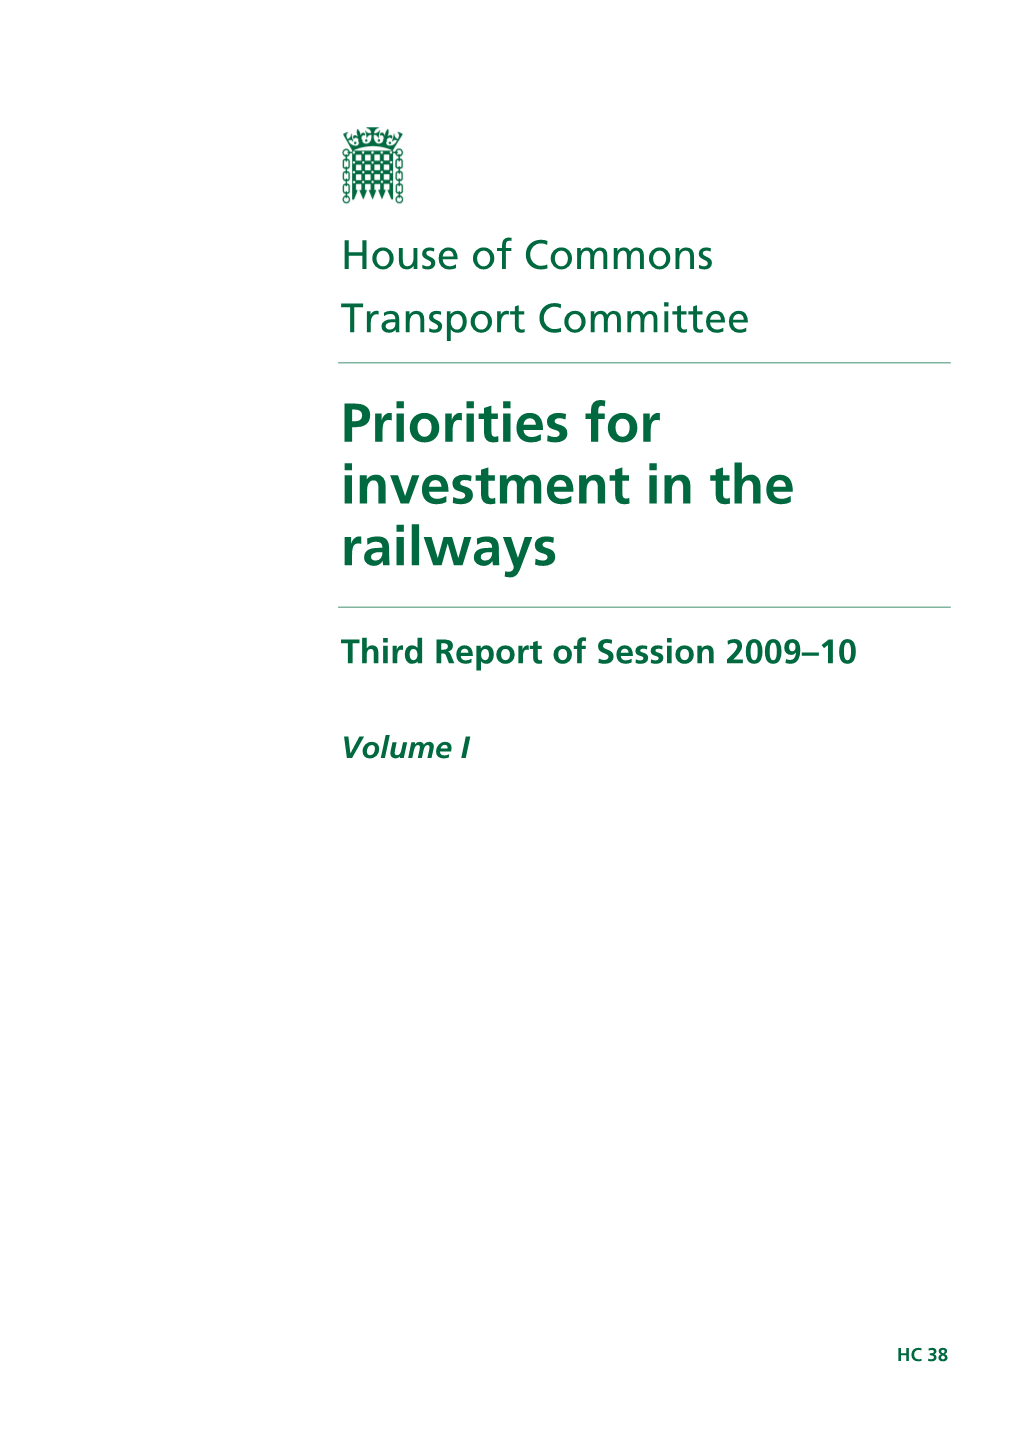 Priorities for Investment in the Railways